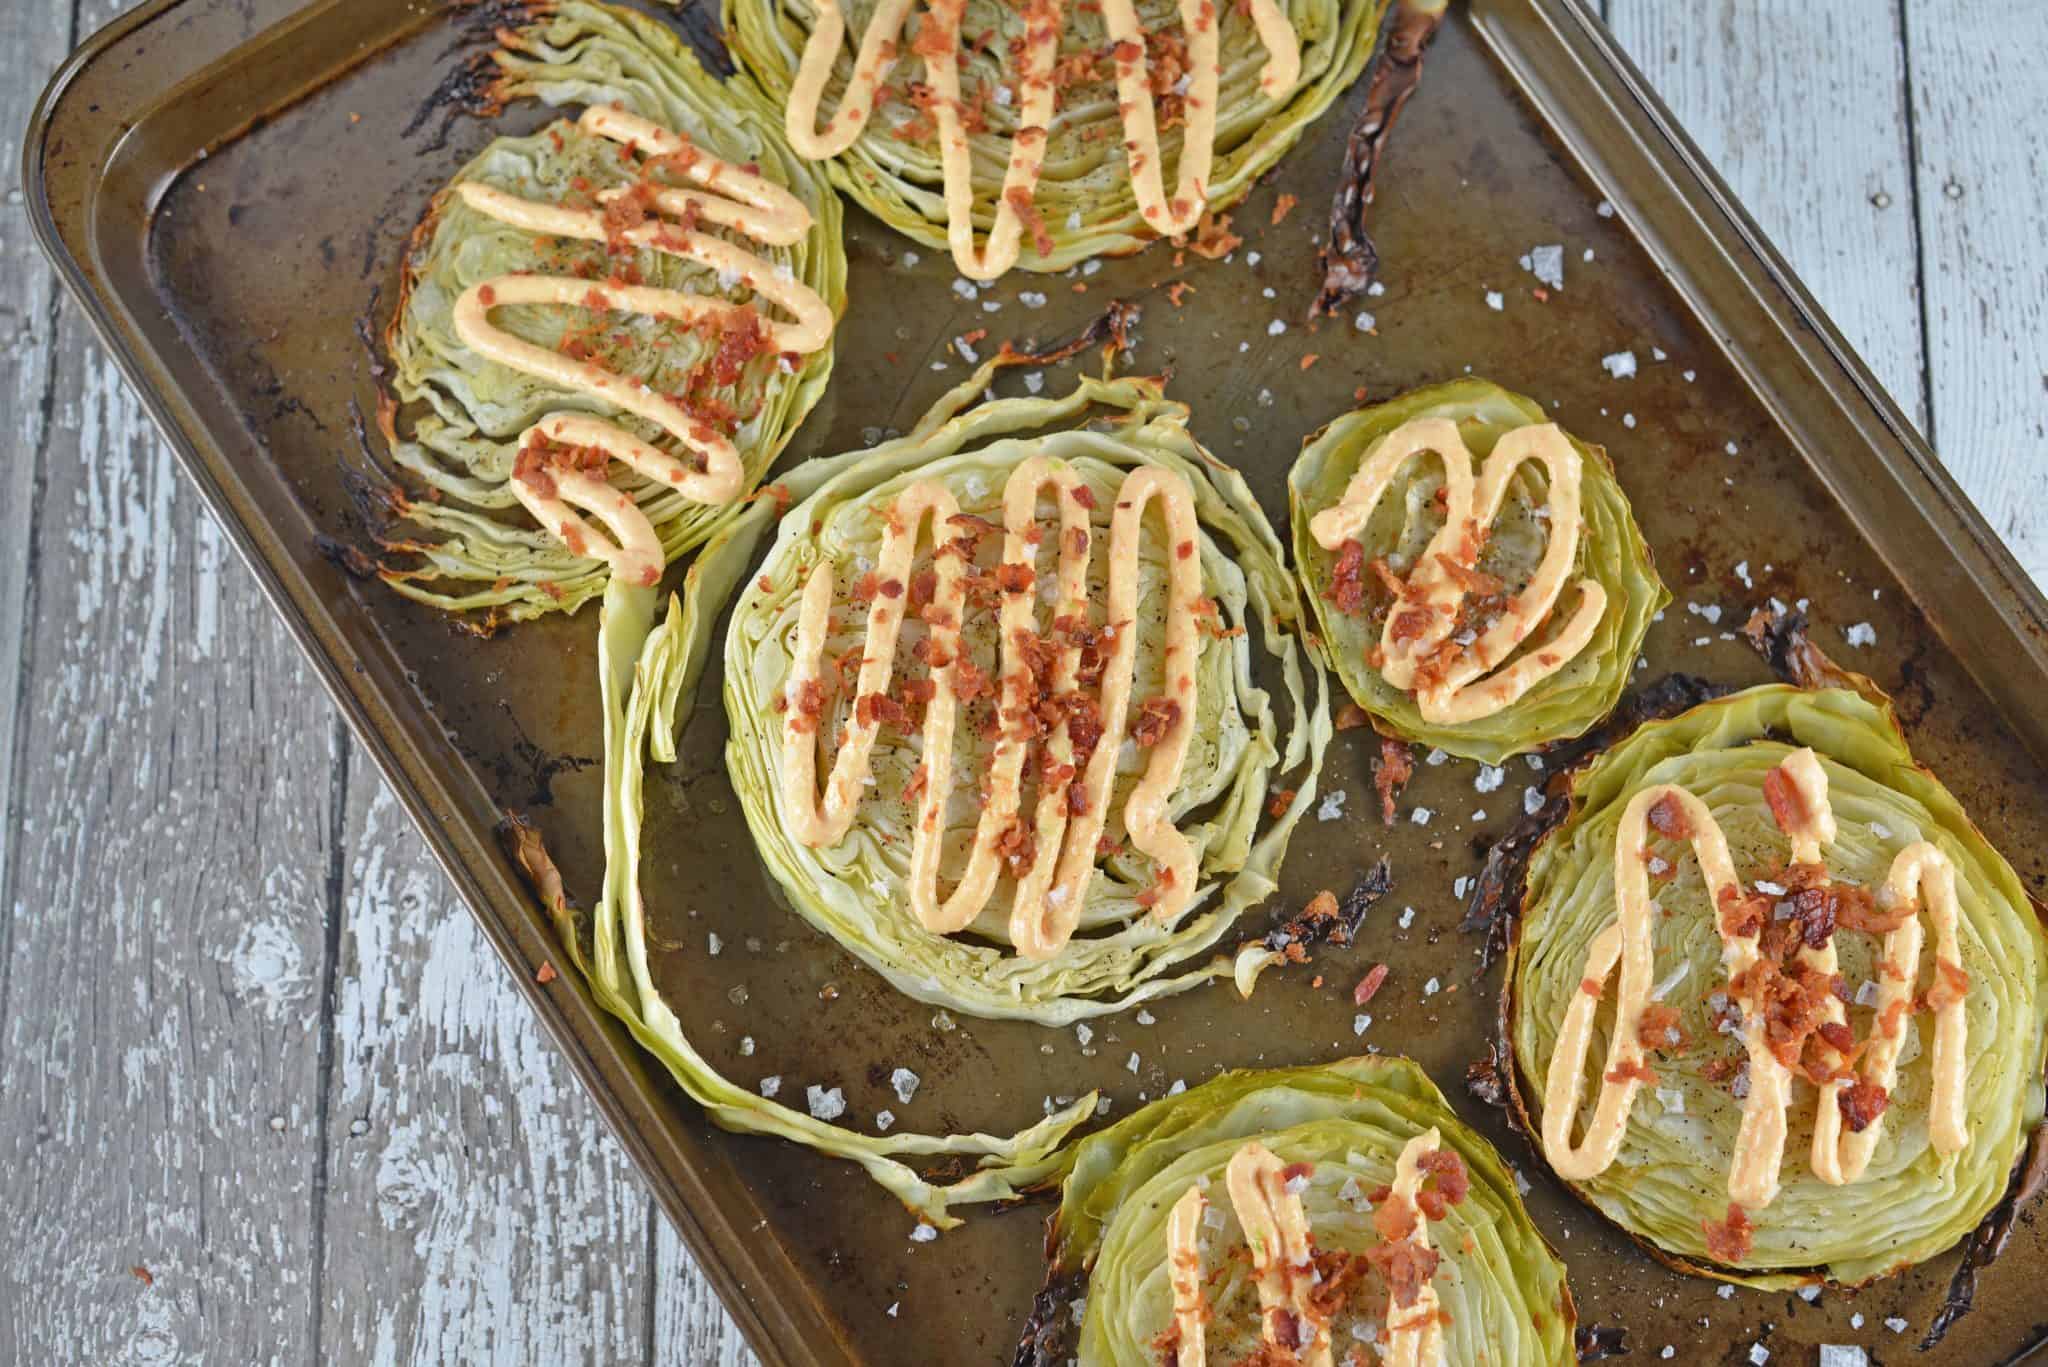 Garlic Cabbage Steaks are caramelized to perfection, then topped with a garlic and smoked paprika aioli, bacon and sea salt. Serve with any meal, especially corned beef! #cabbagerecipes #cabbagesidedish www.savoryexperiments.com 